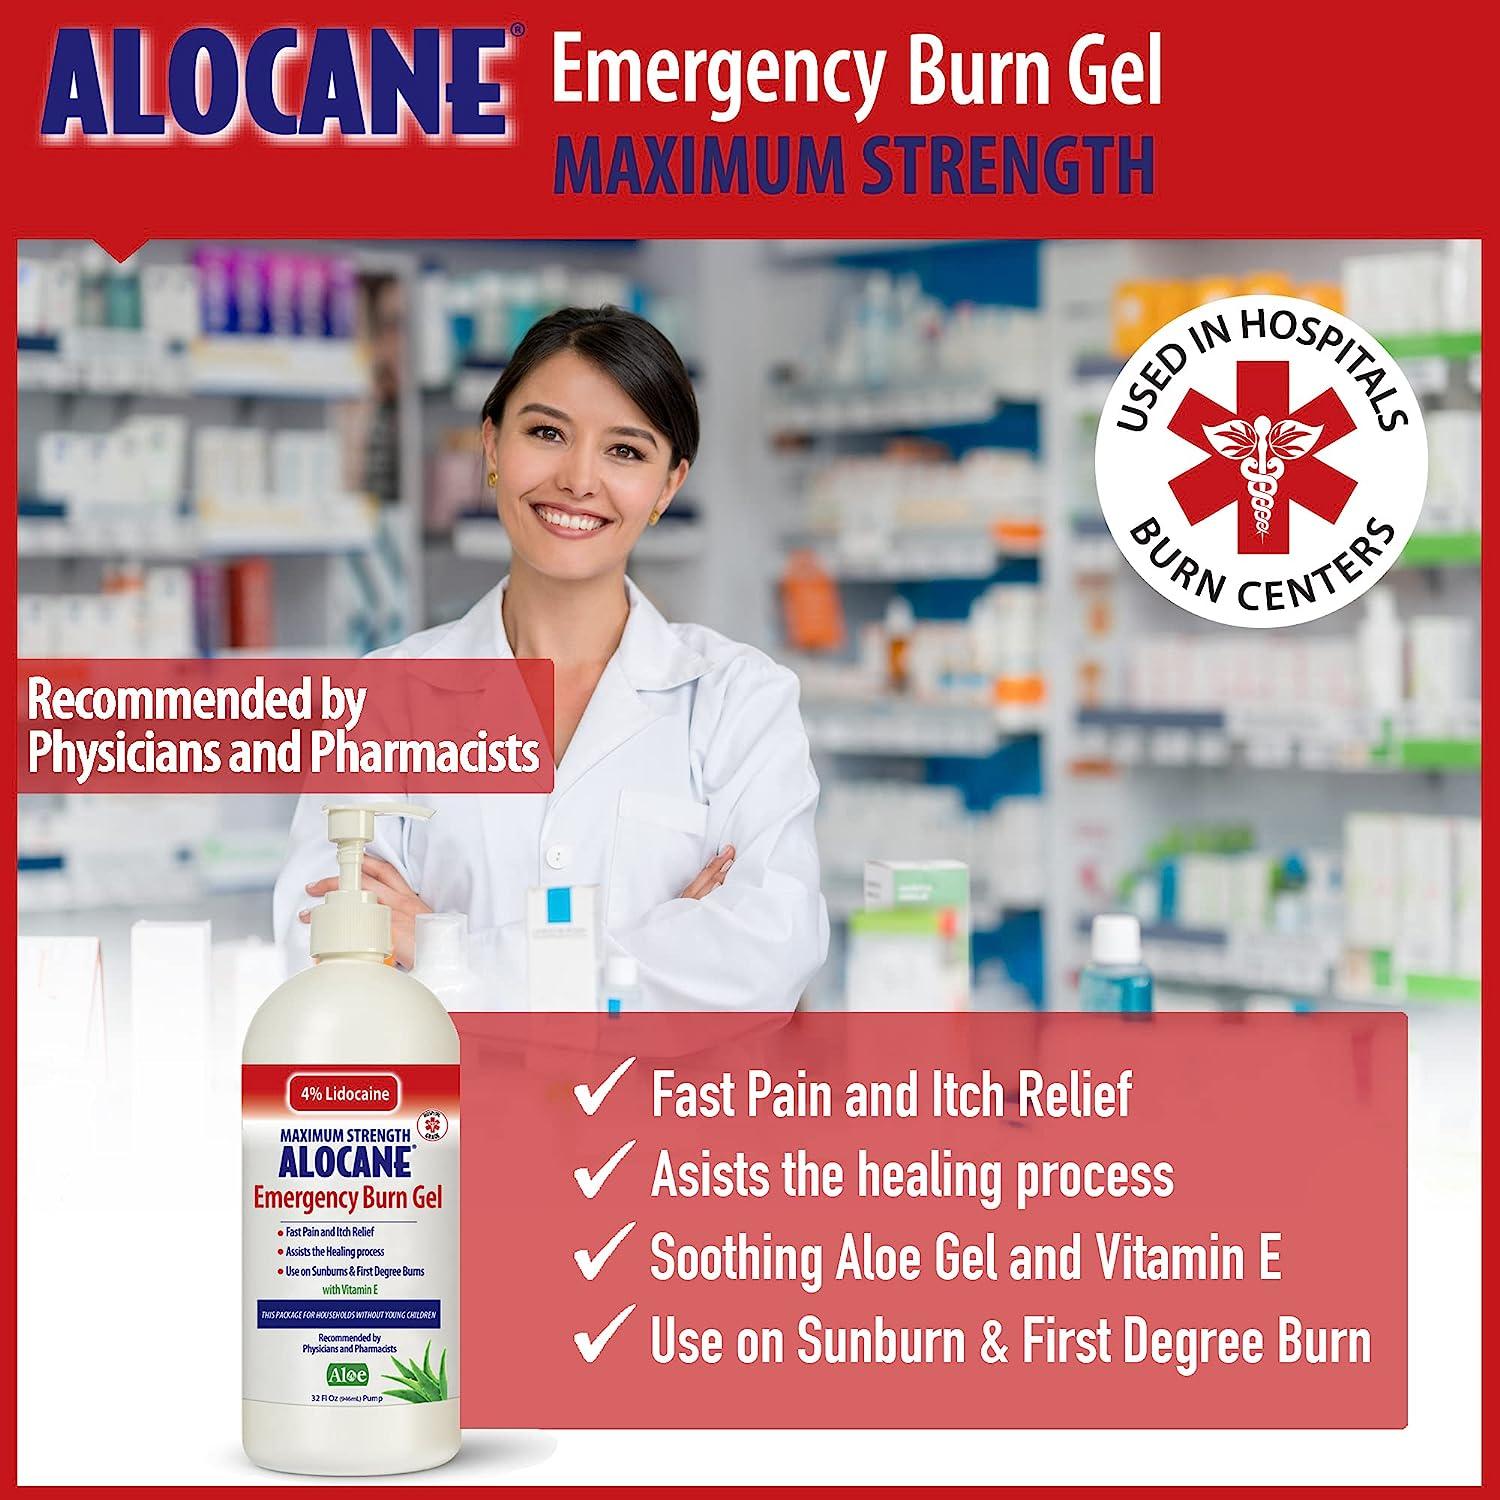  Alocane Plus Topical Anesthetic Emergency Burn Gel Maximum  Strength 4% Lidocaine, Commercial Grade, for Restaurants, Manufacturing,  Other Heat Related Work Environments, Commercial Use Only, 2 Ounce : Health  & Household